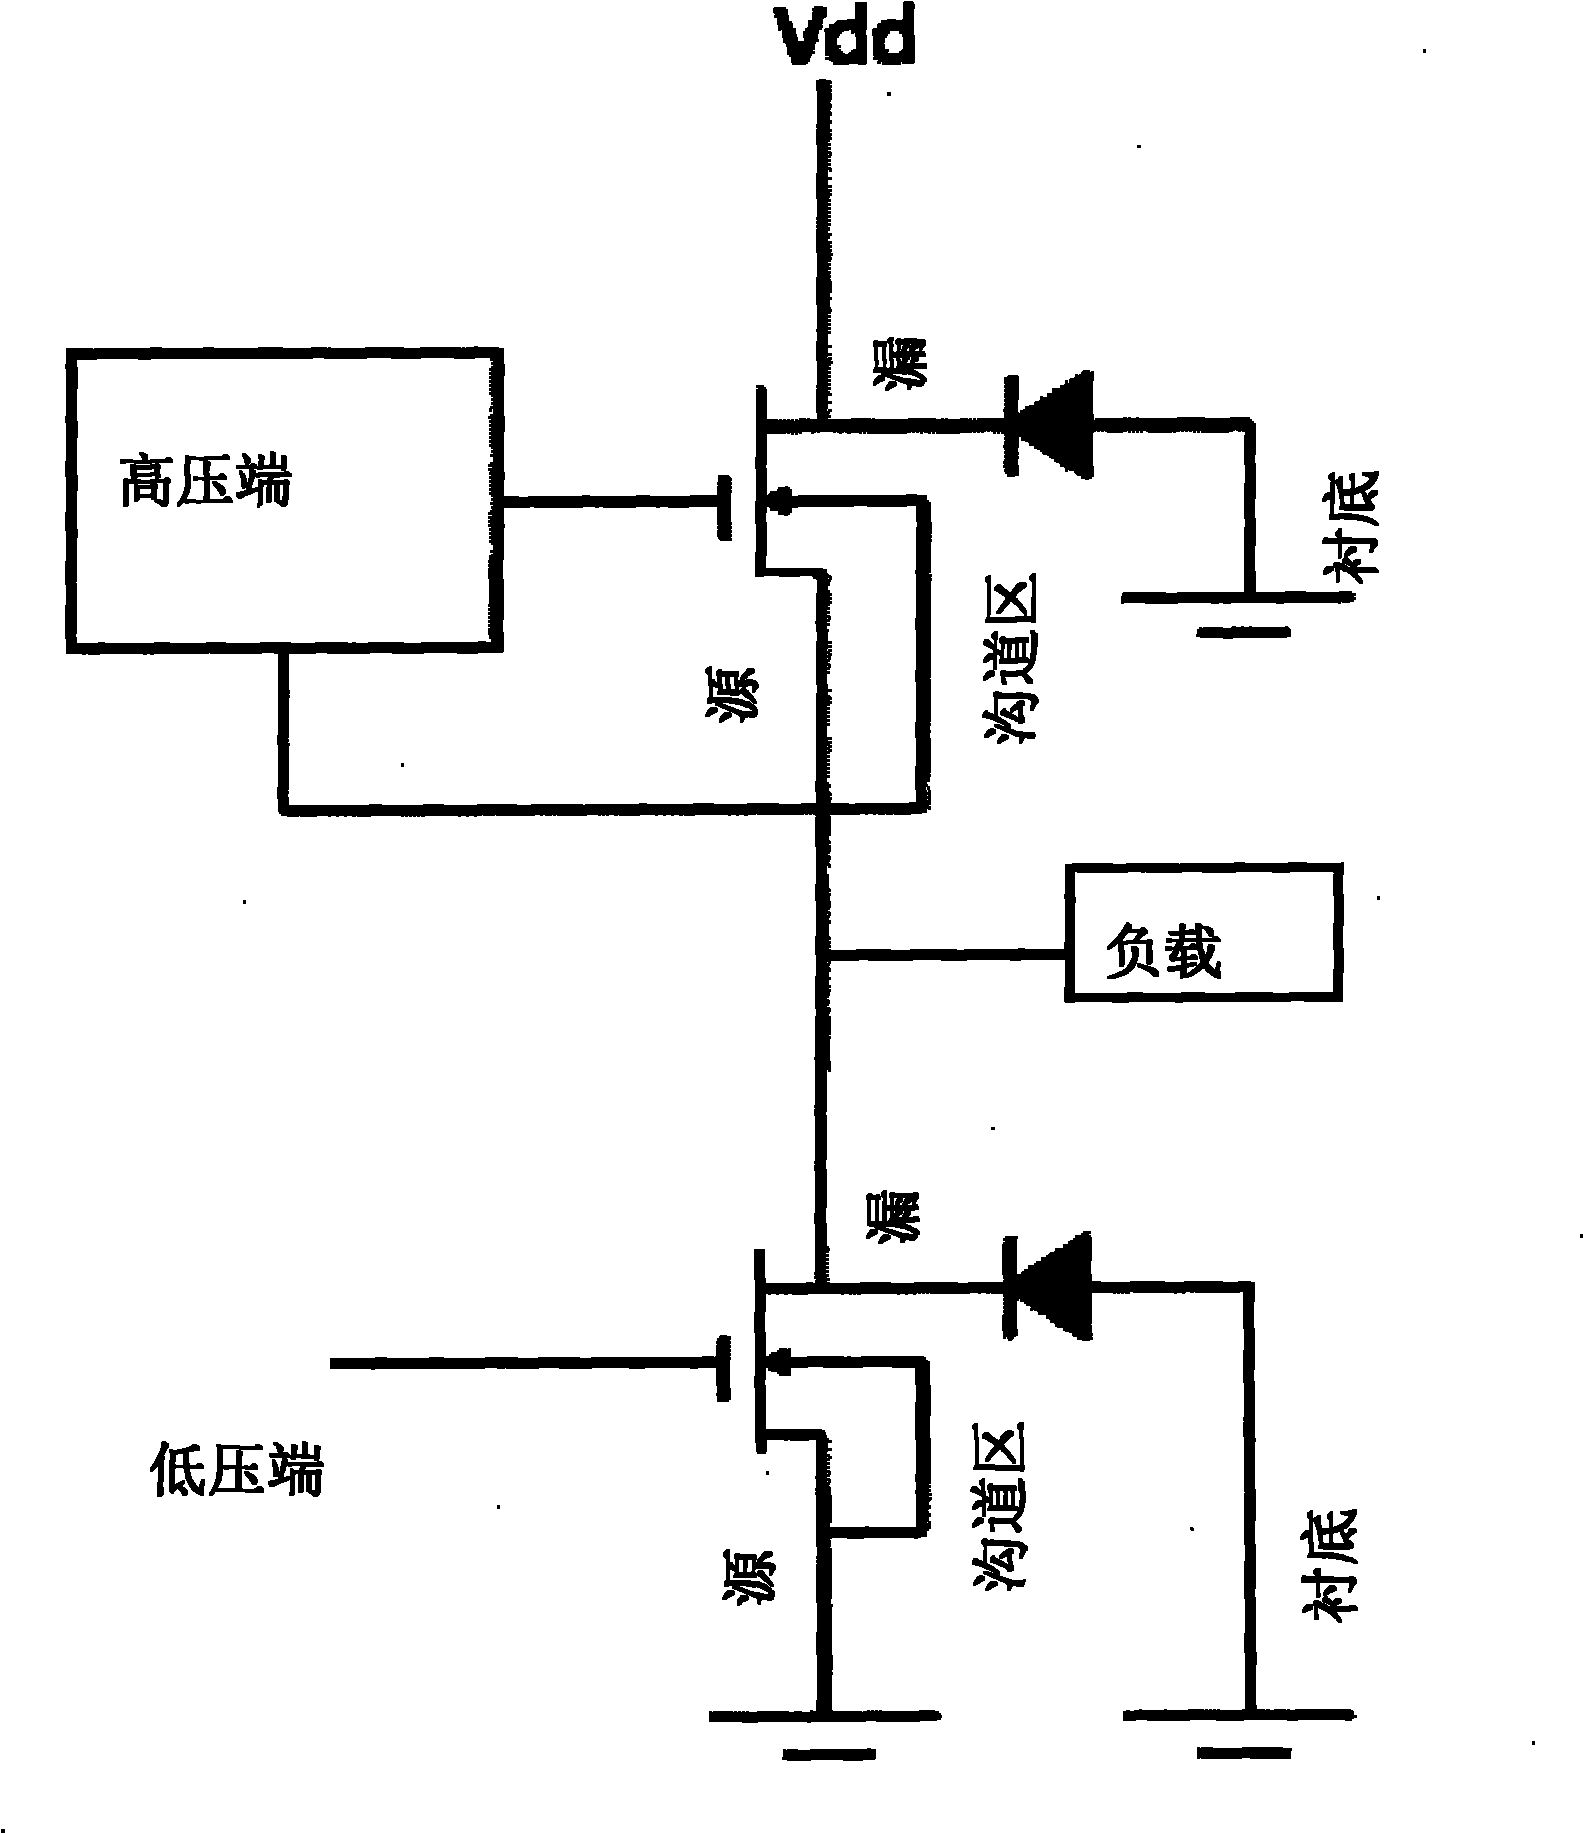 High-voltage insulation type LDNMOS (laterally diffused metal oxide semiconductor) device and manufacture method thereof